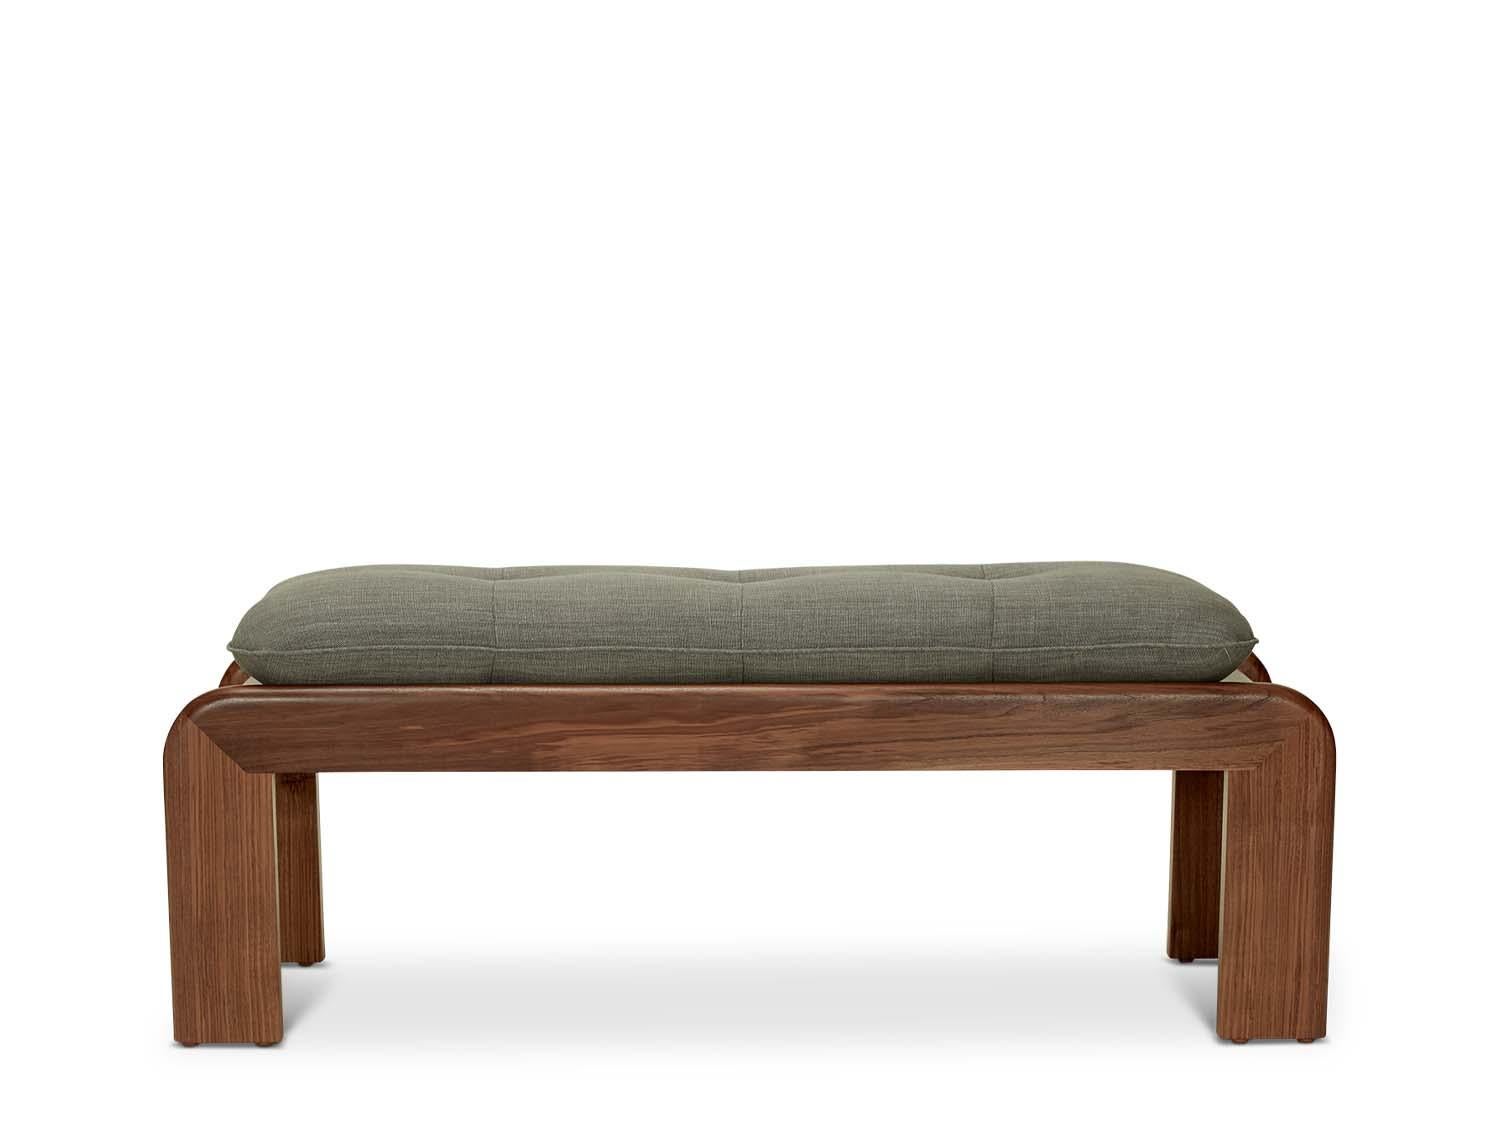 The Topa bench features a handcrafted roundover frame and secured tufted cushion.

The Lawson-Fenning Collection is designed and handmade in Los Angeles, California. Reach out to discover what options are currently in stock.